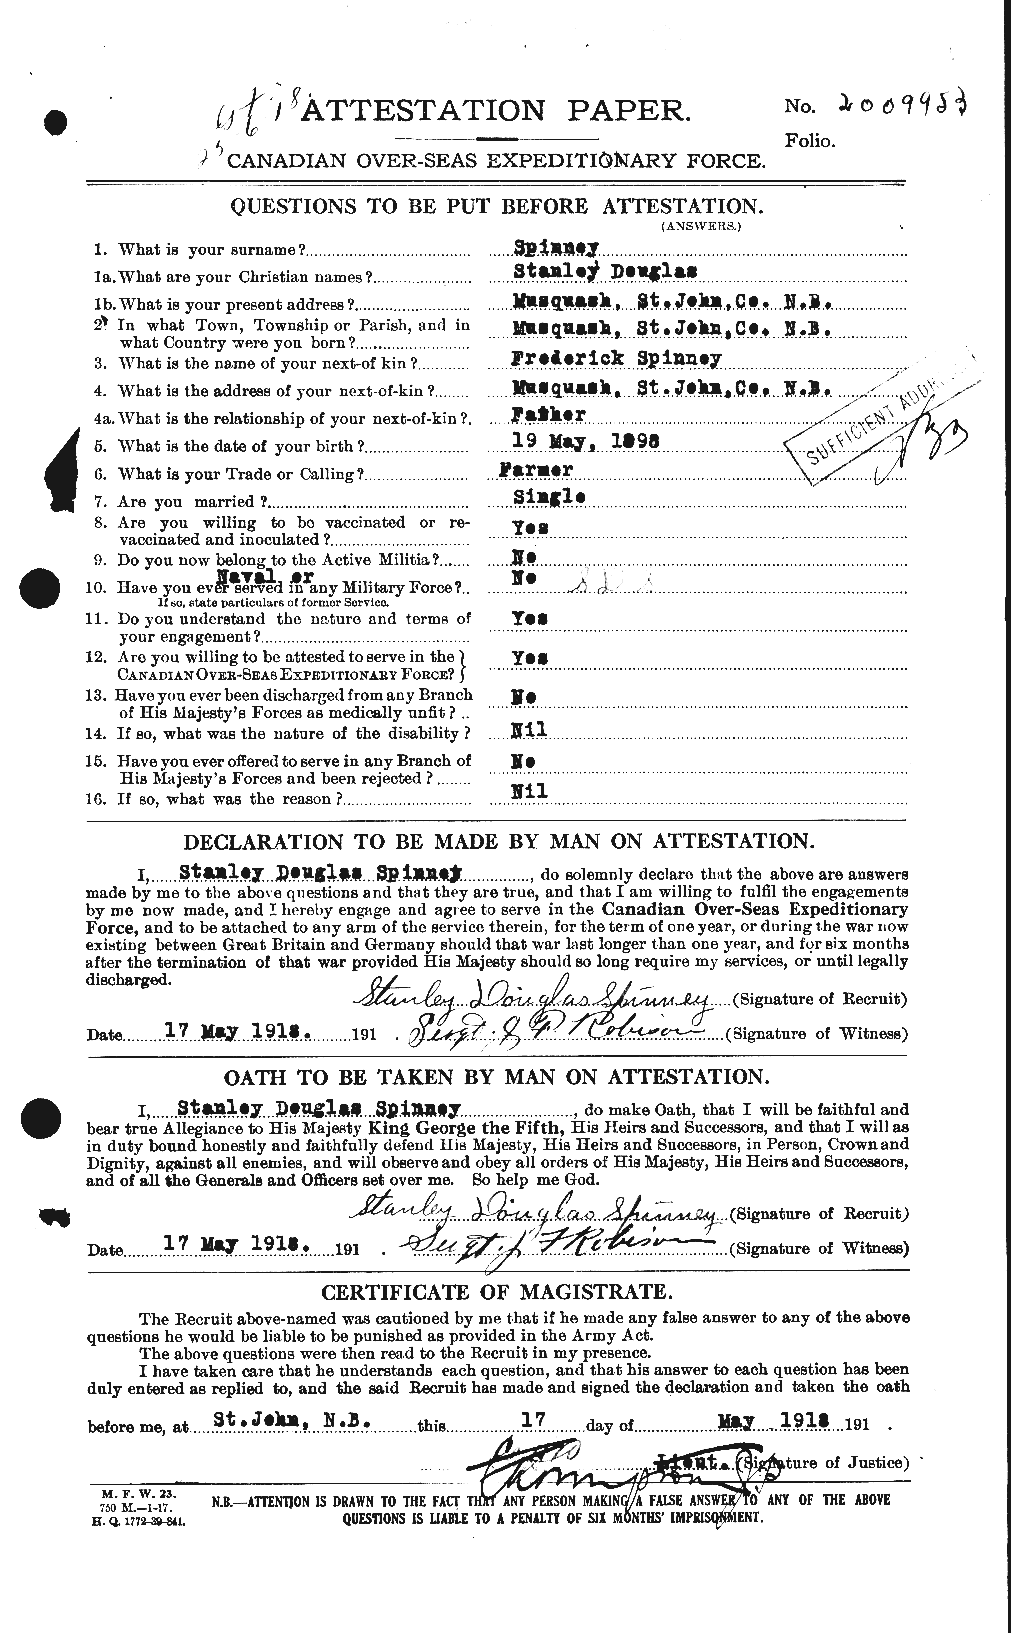 Personnel Records of the First World War - CEF 114406a